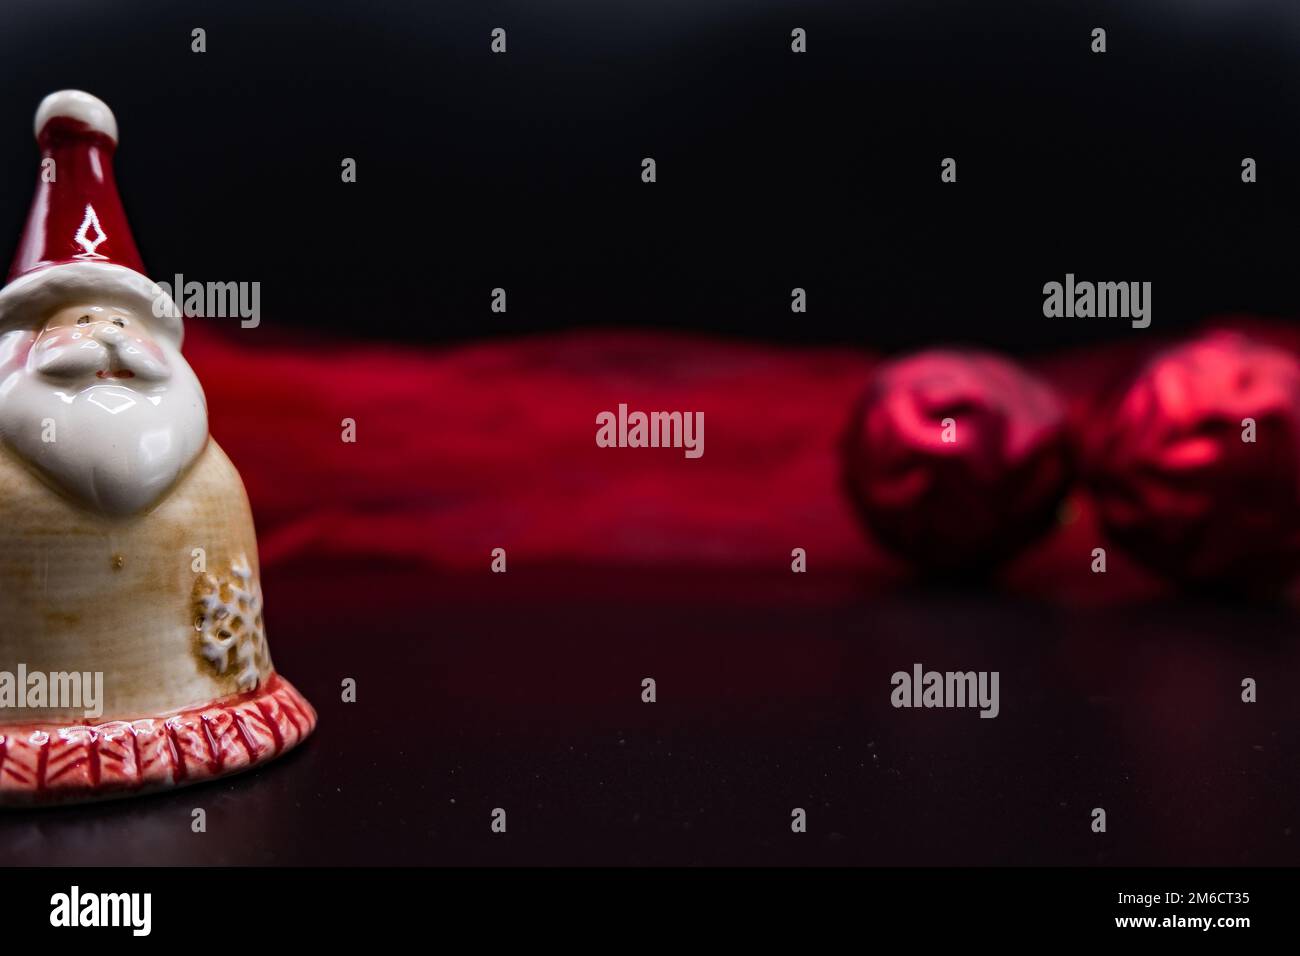 Santa Claus figure, red Christmas balls and red fabric on black. Stock Photo